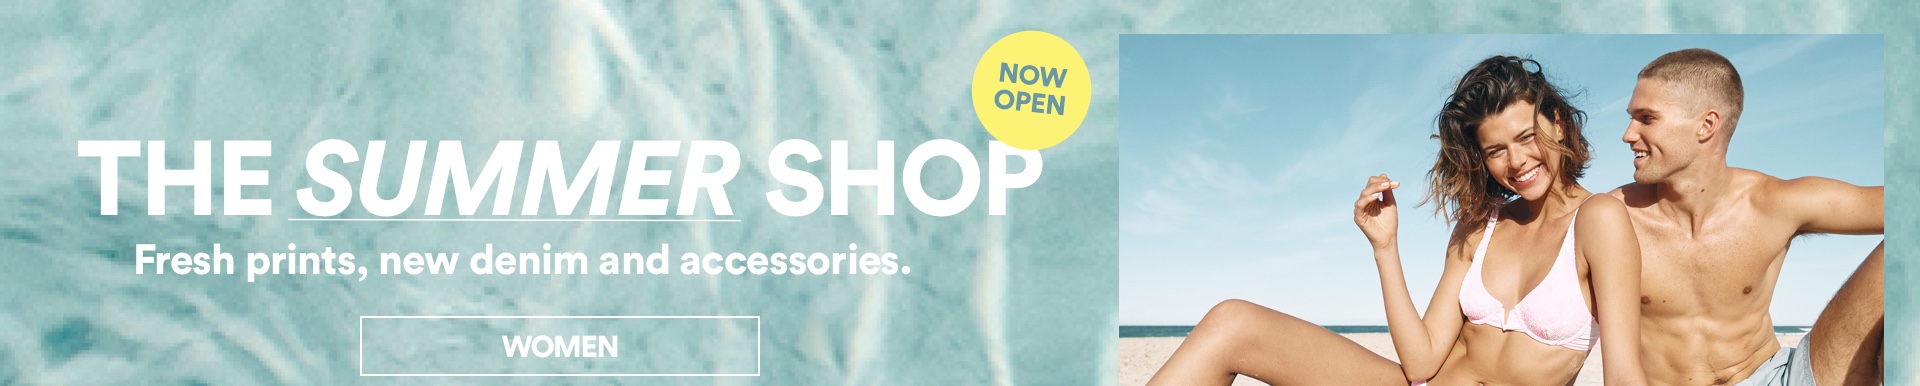 The Summer Shop | Now Open | Fresh prints, new denim and accessories. Click to Shop Women